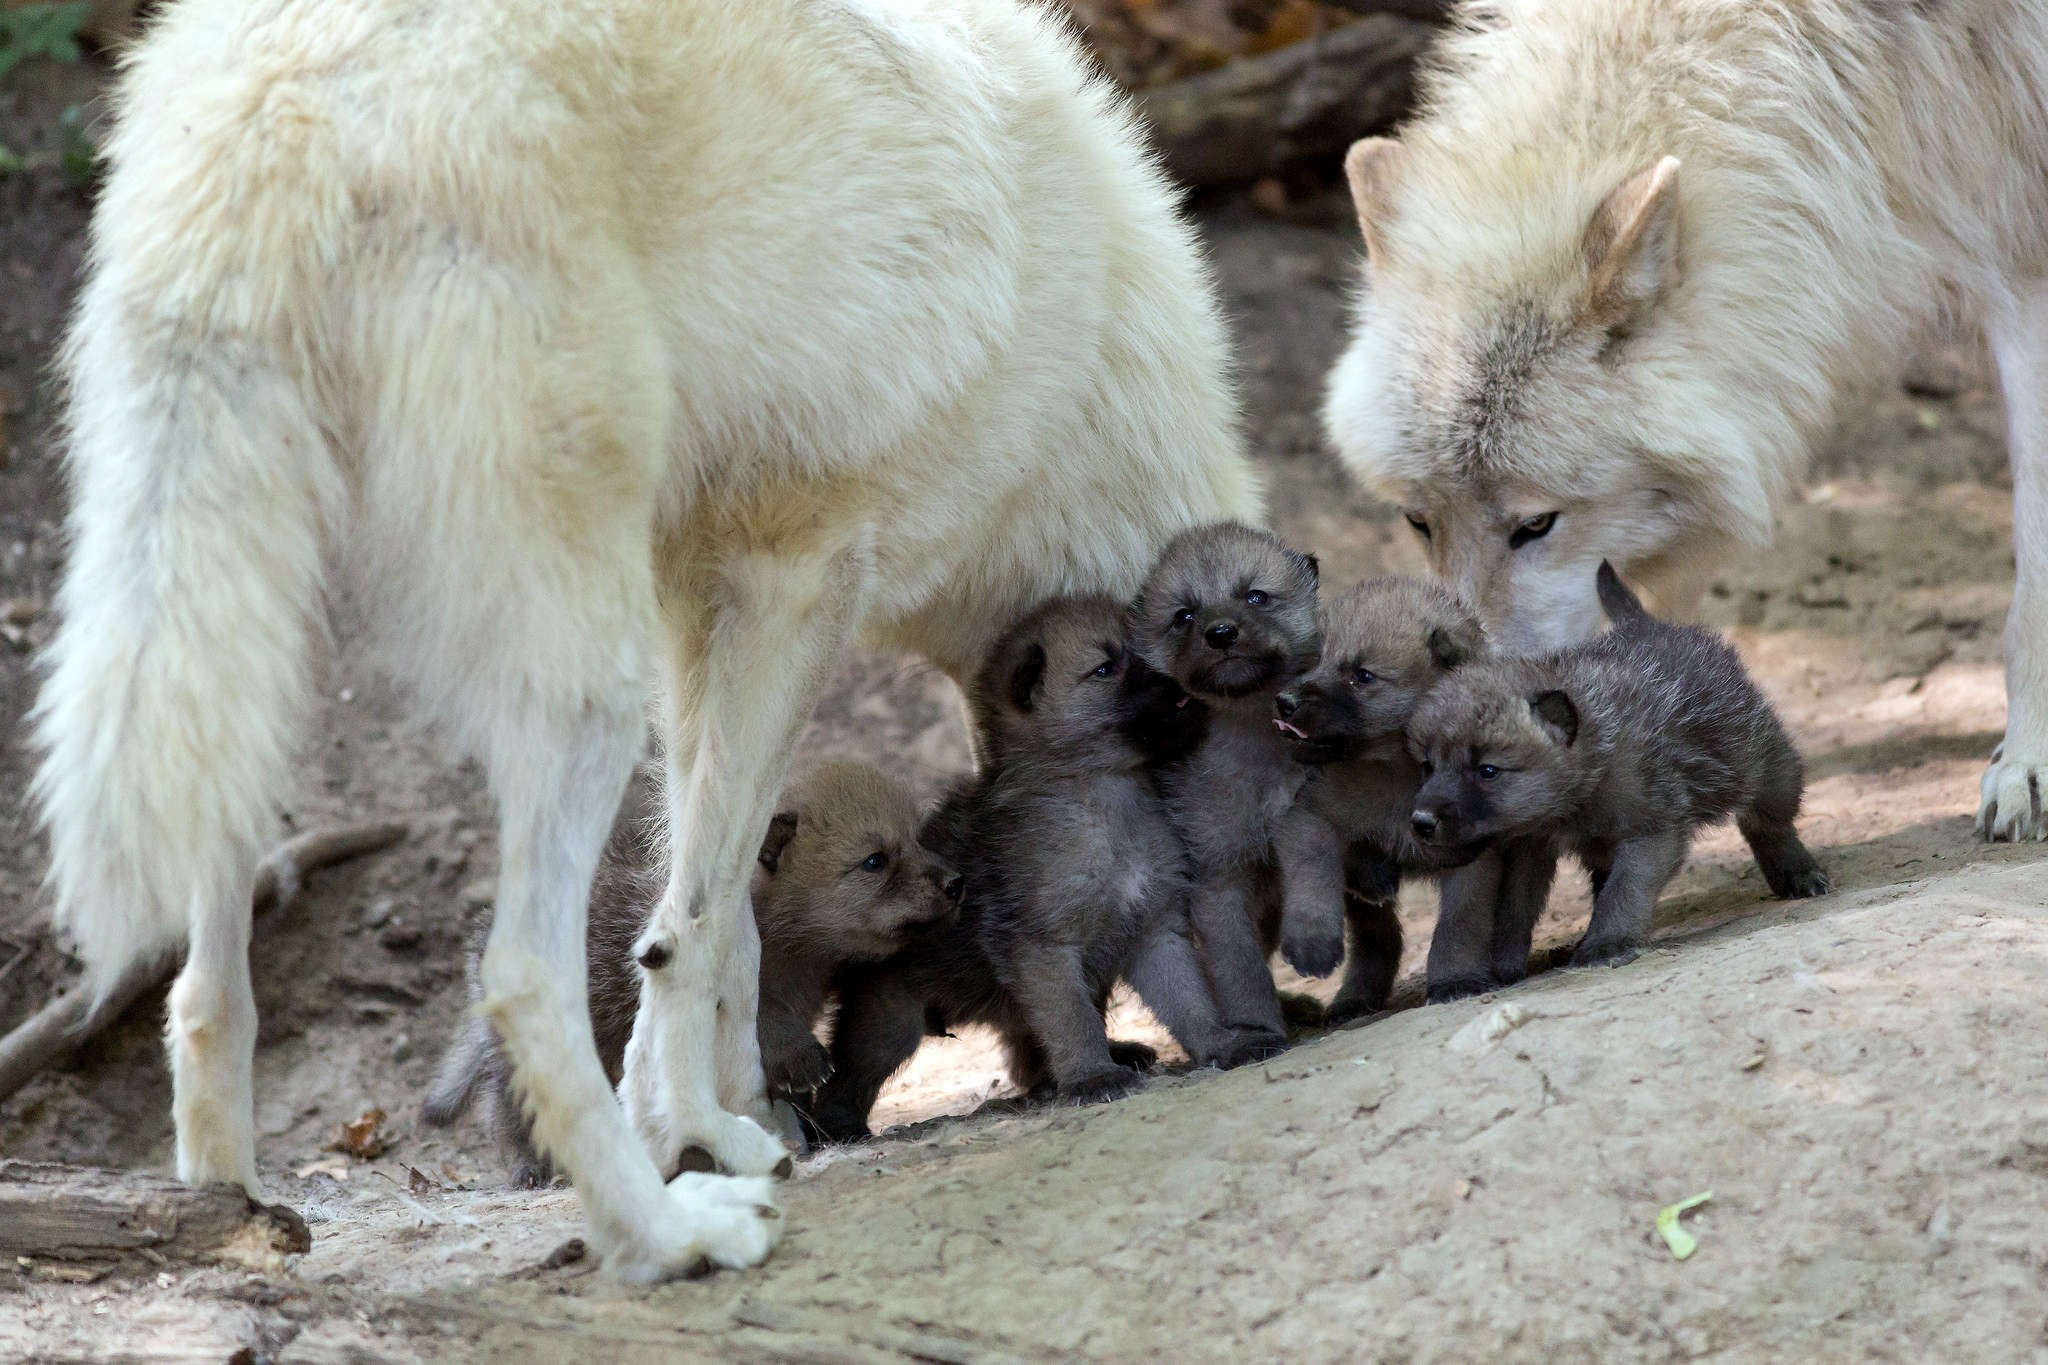 The offspring of wolves wallpapers and images - wallpapers, pictures ...